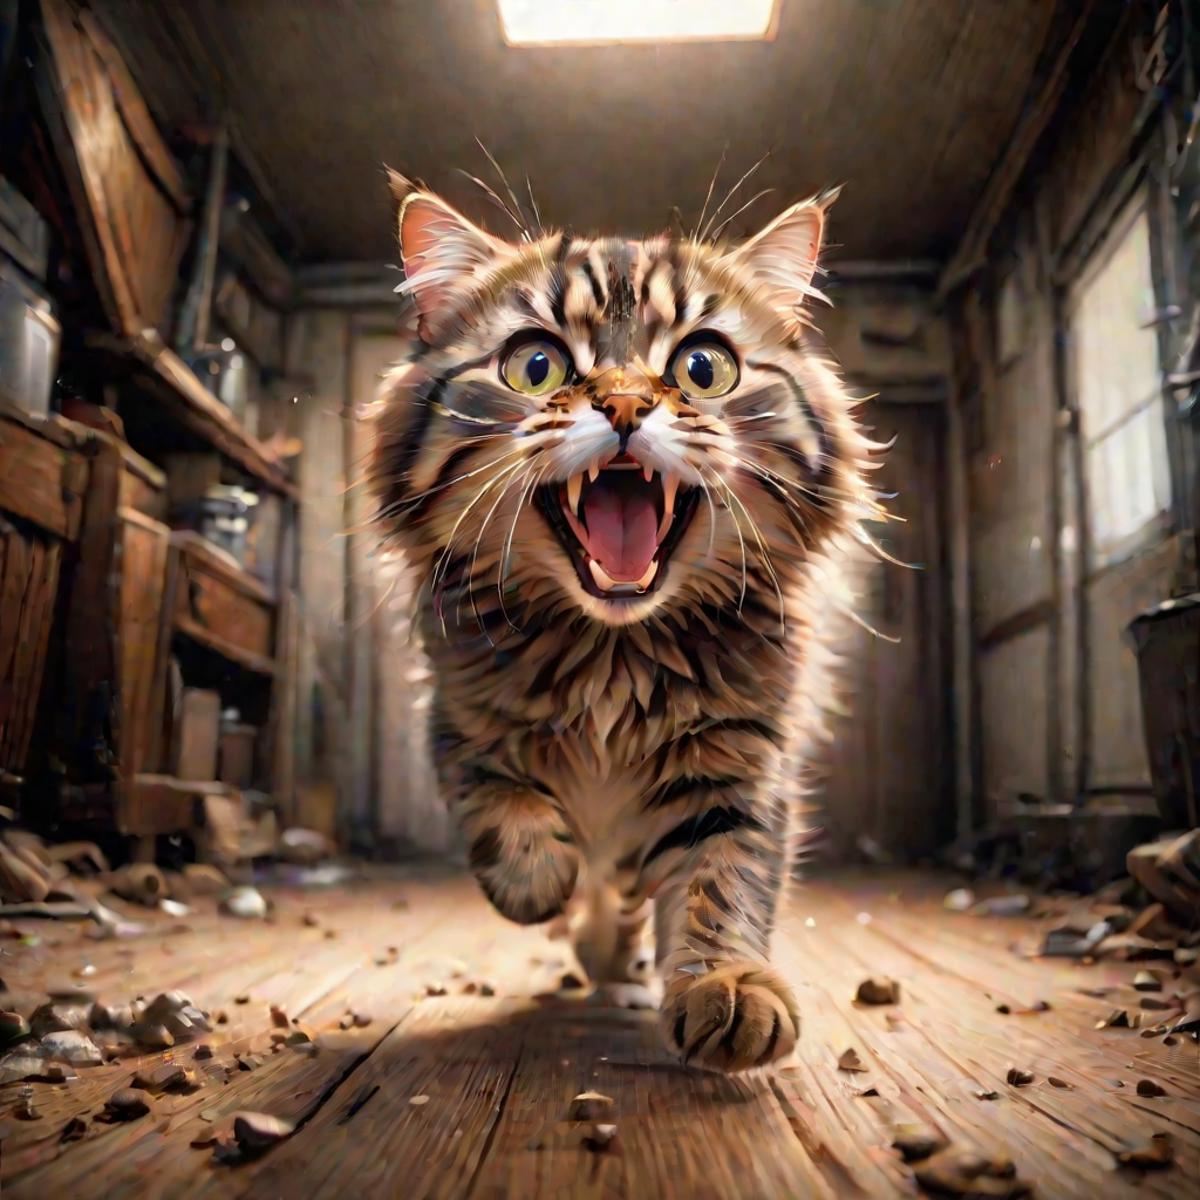 Angry Cat Running Down the Hallway